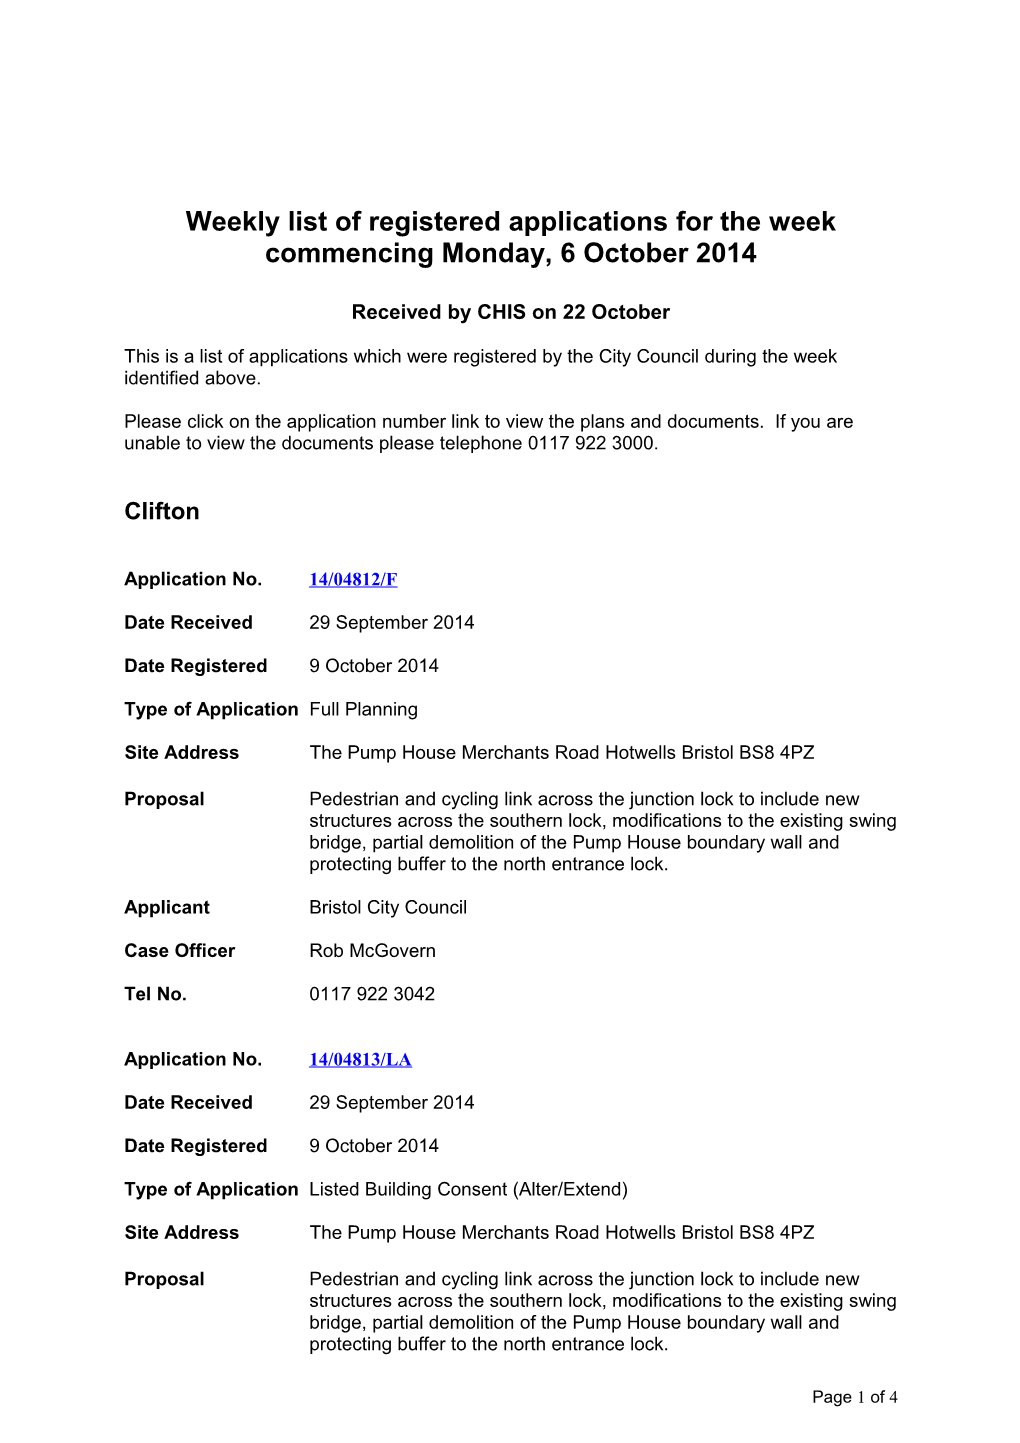 Weekly List of Registered Applications for the Week Commencing Monday, 6 October 2014